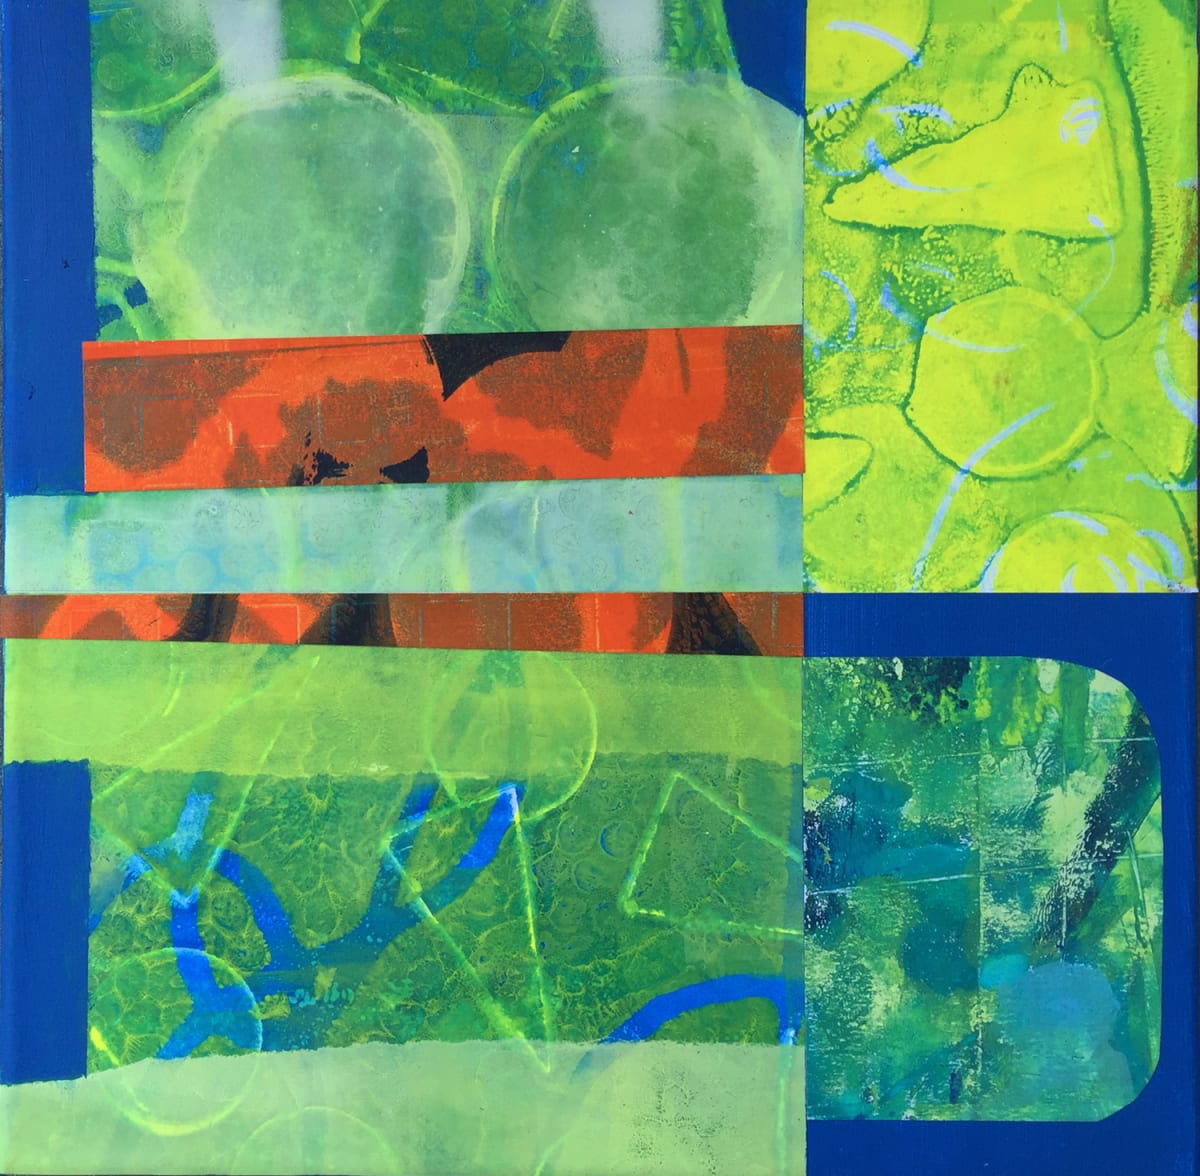 Green Collage  Image: Collage made up of gelatin print fragments